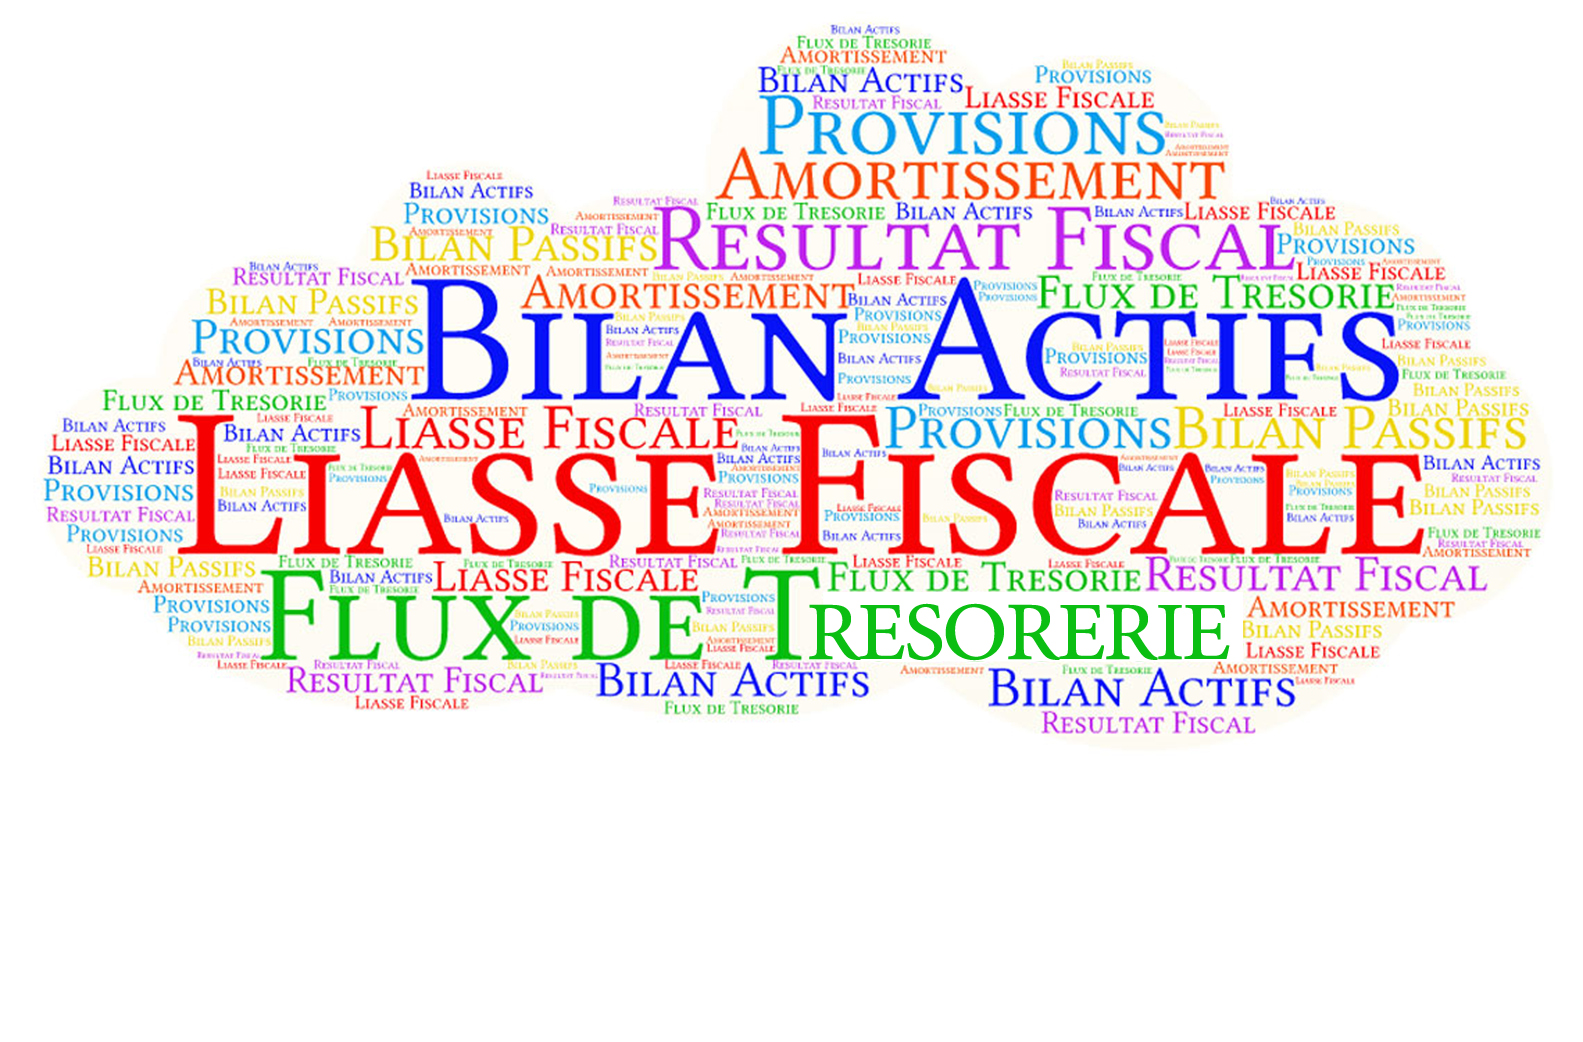 liasse fiscale 2019 excel